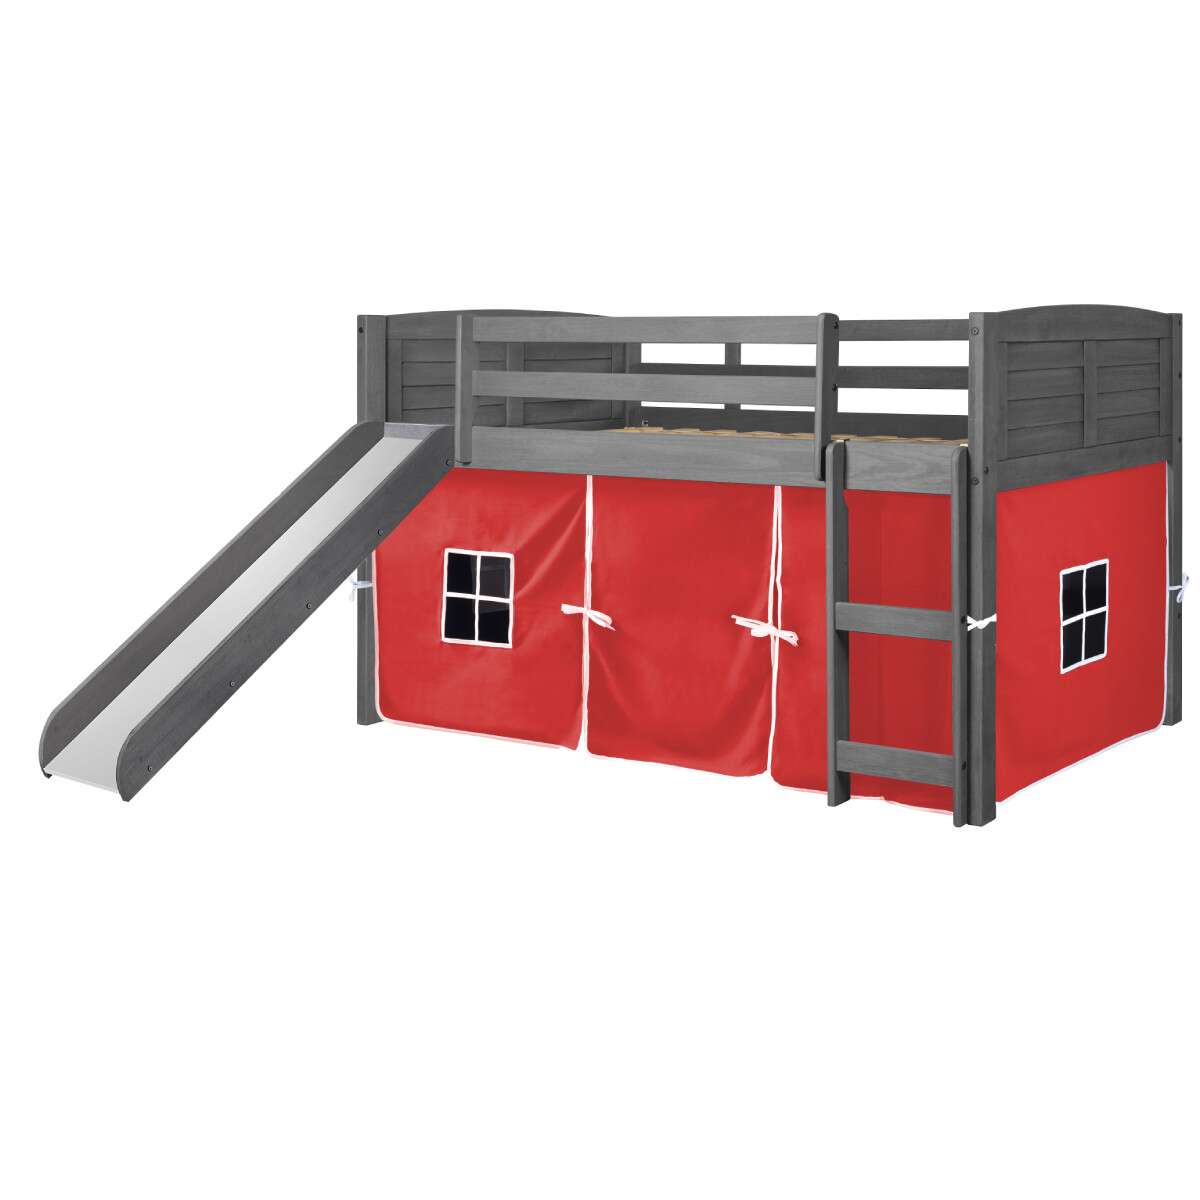 TWIN LOUVER LOW LOFT W/SLIDE & RED TENT KIT IN ANTIQUE GREY FINISH